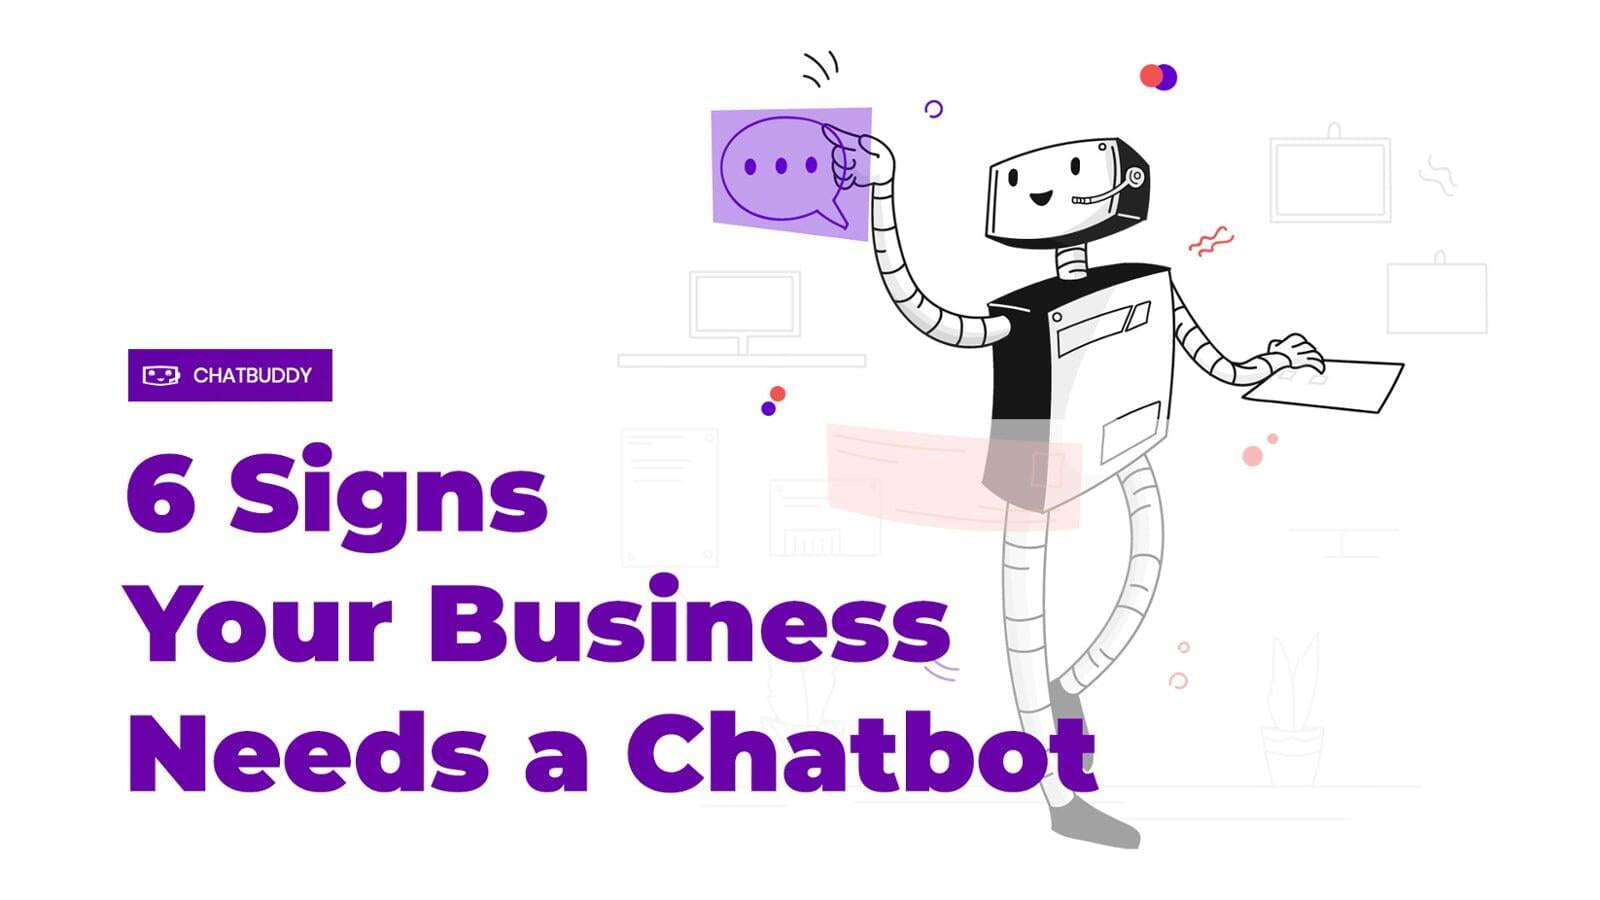 6 Signs Your Business Needs a Chatbot